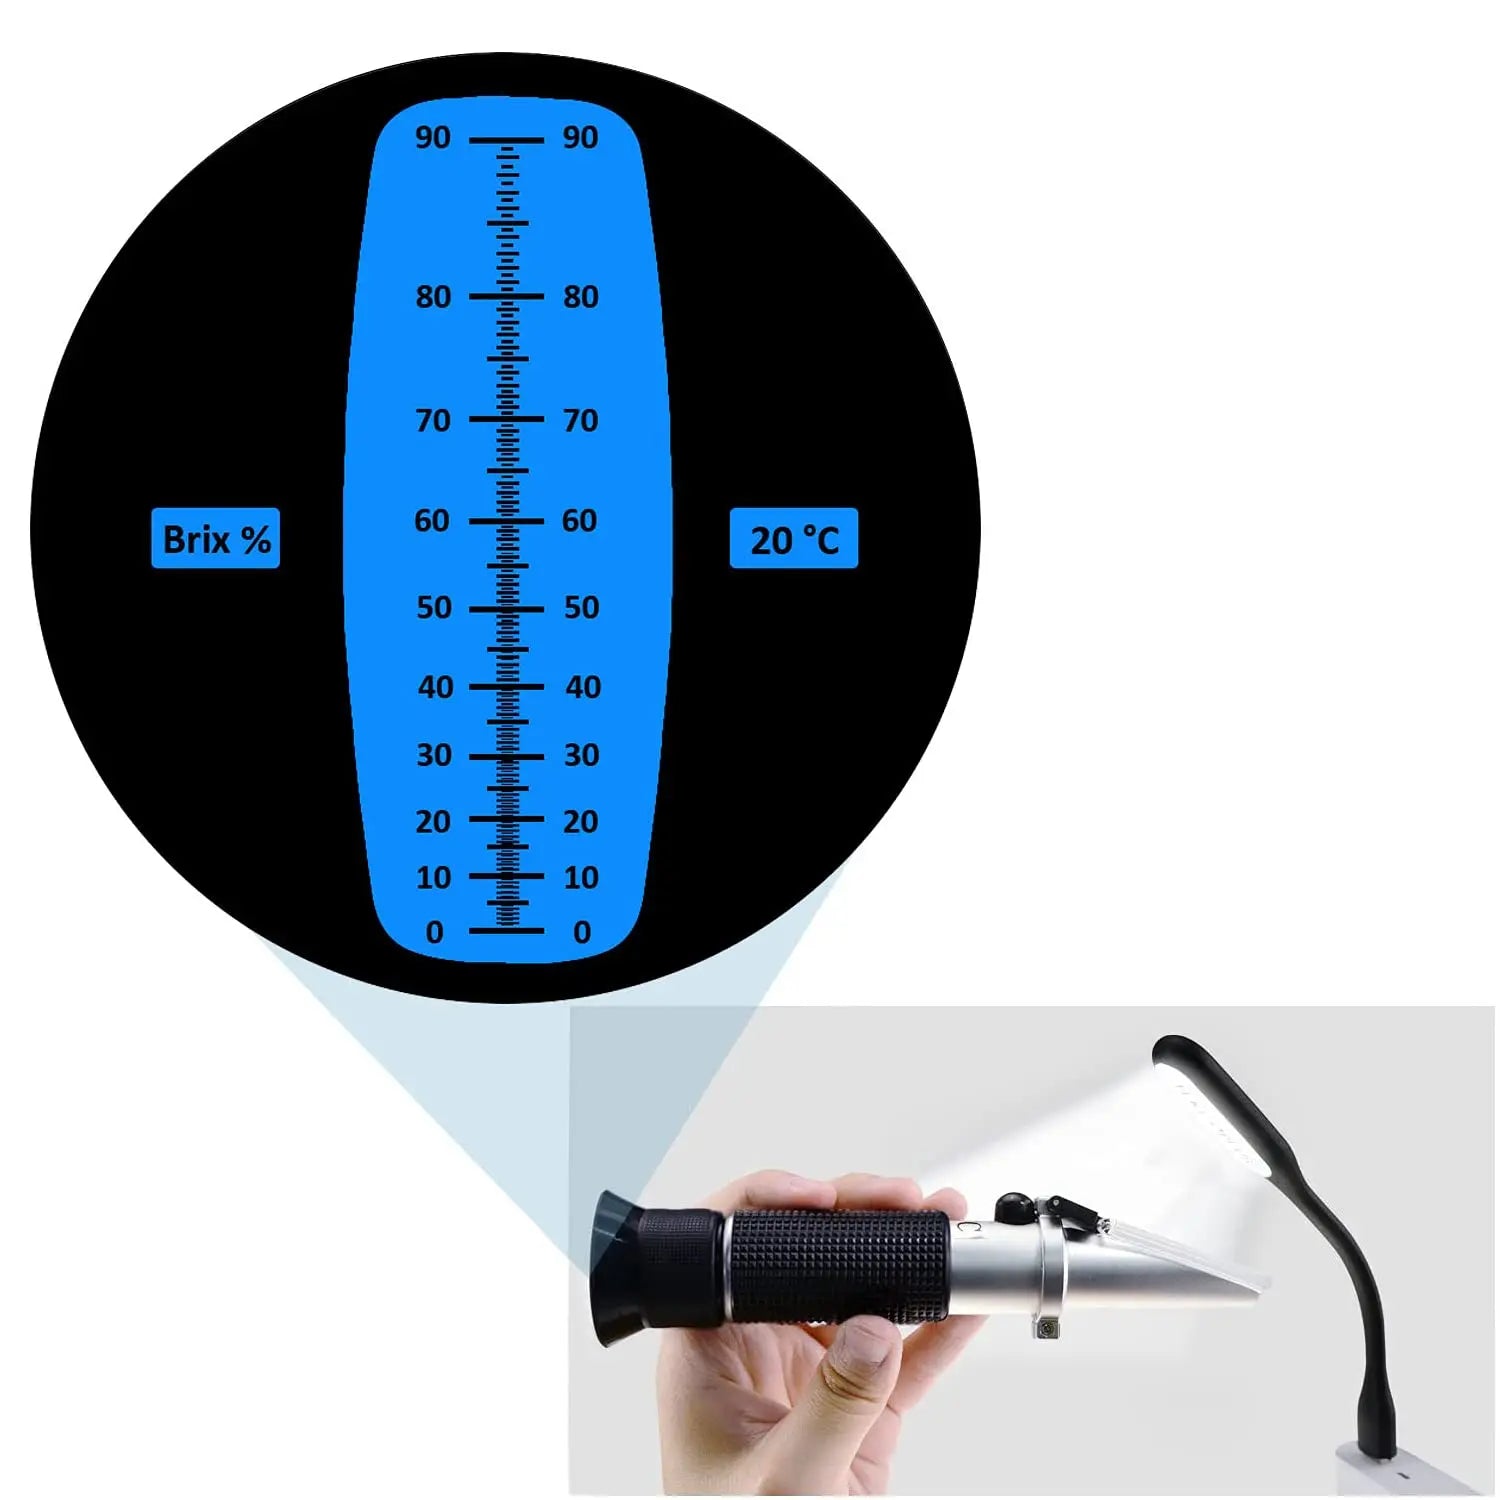 Portable 0-90% Brix Refractometer High Accurate with ATC,Sugar Content Measurement for Sugar Food Fruit Beverages Honey